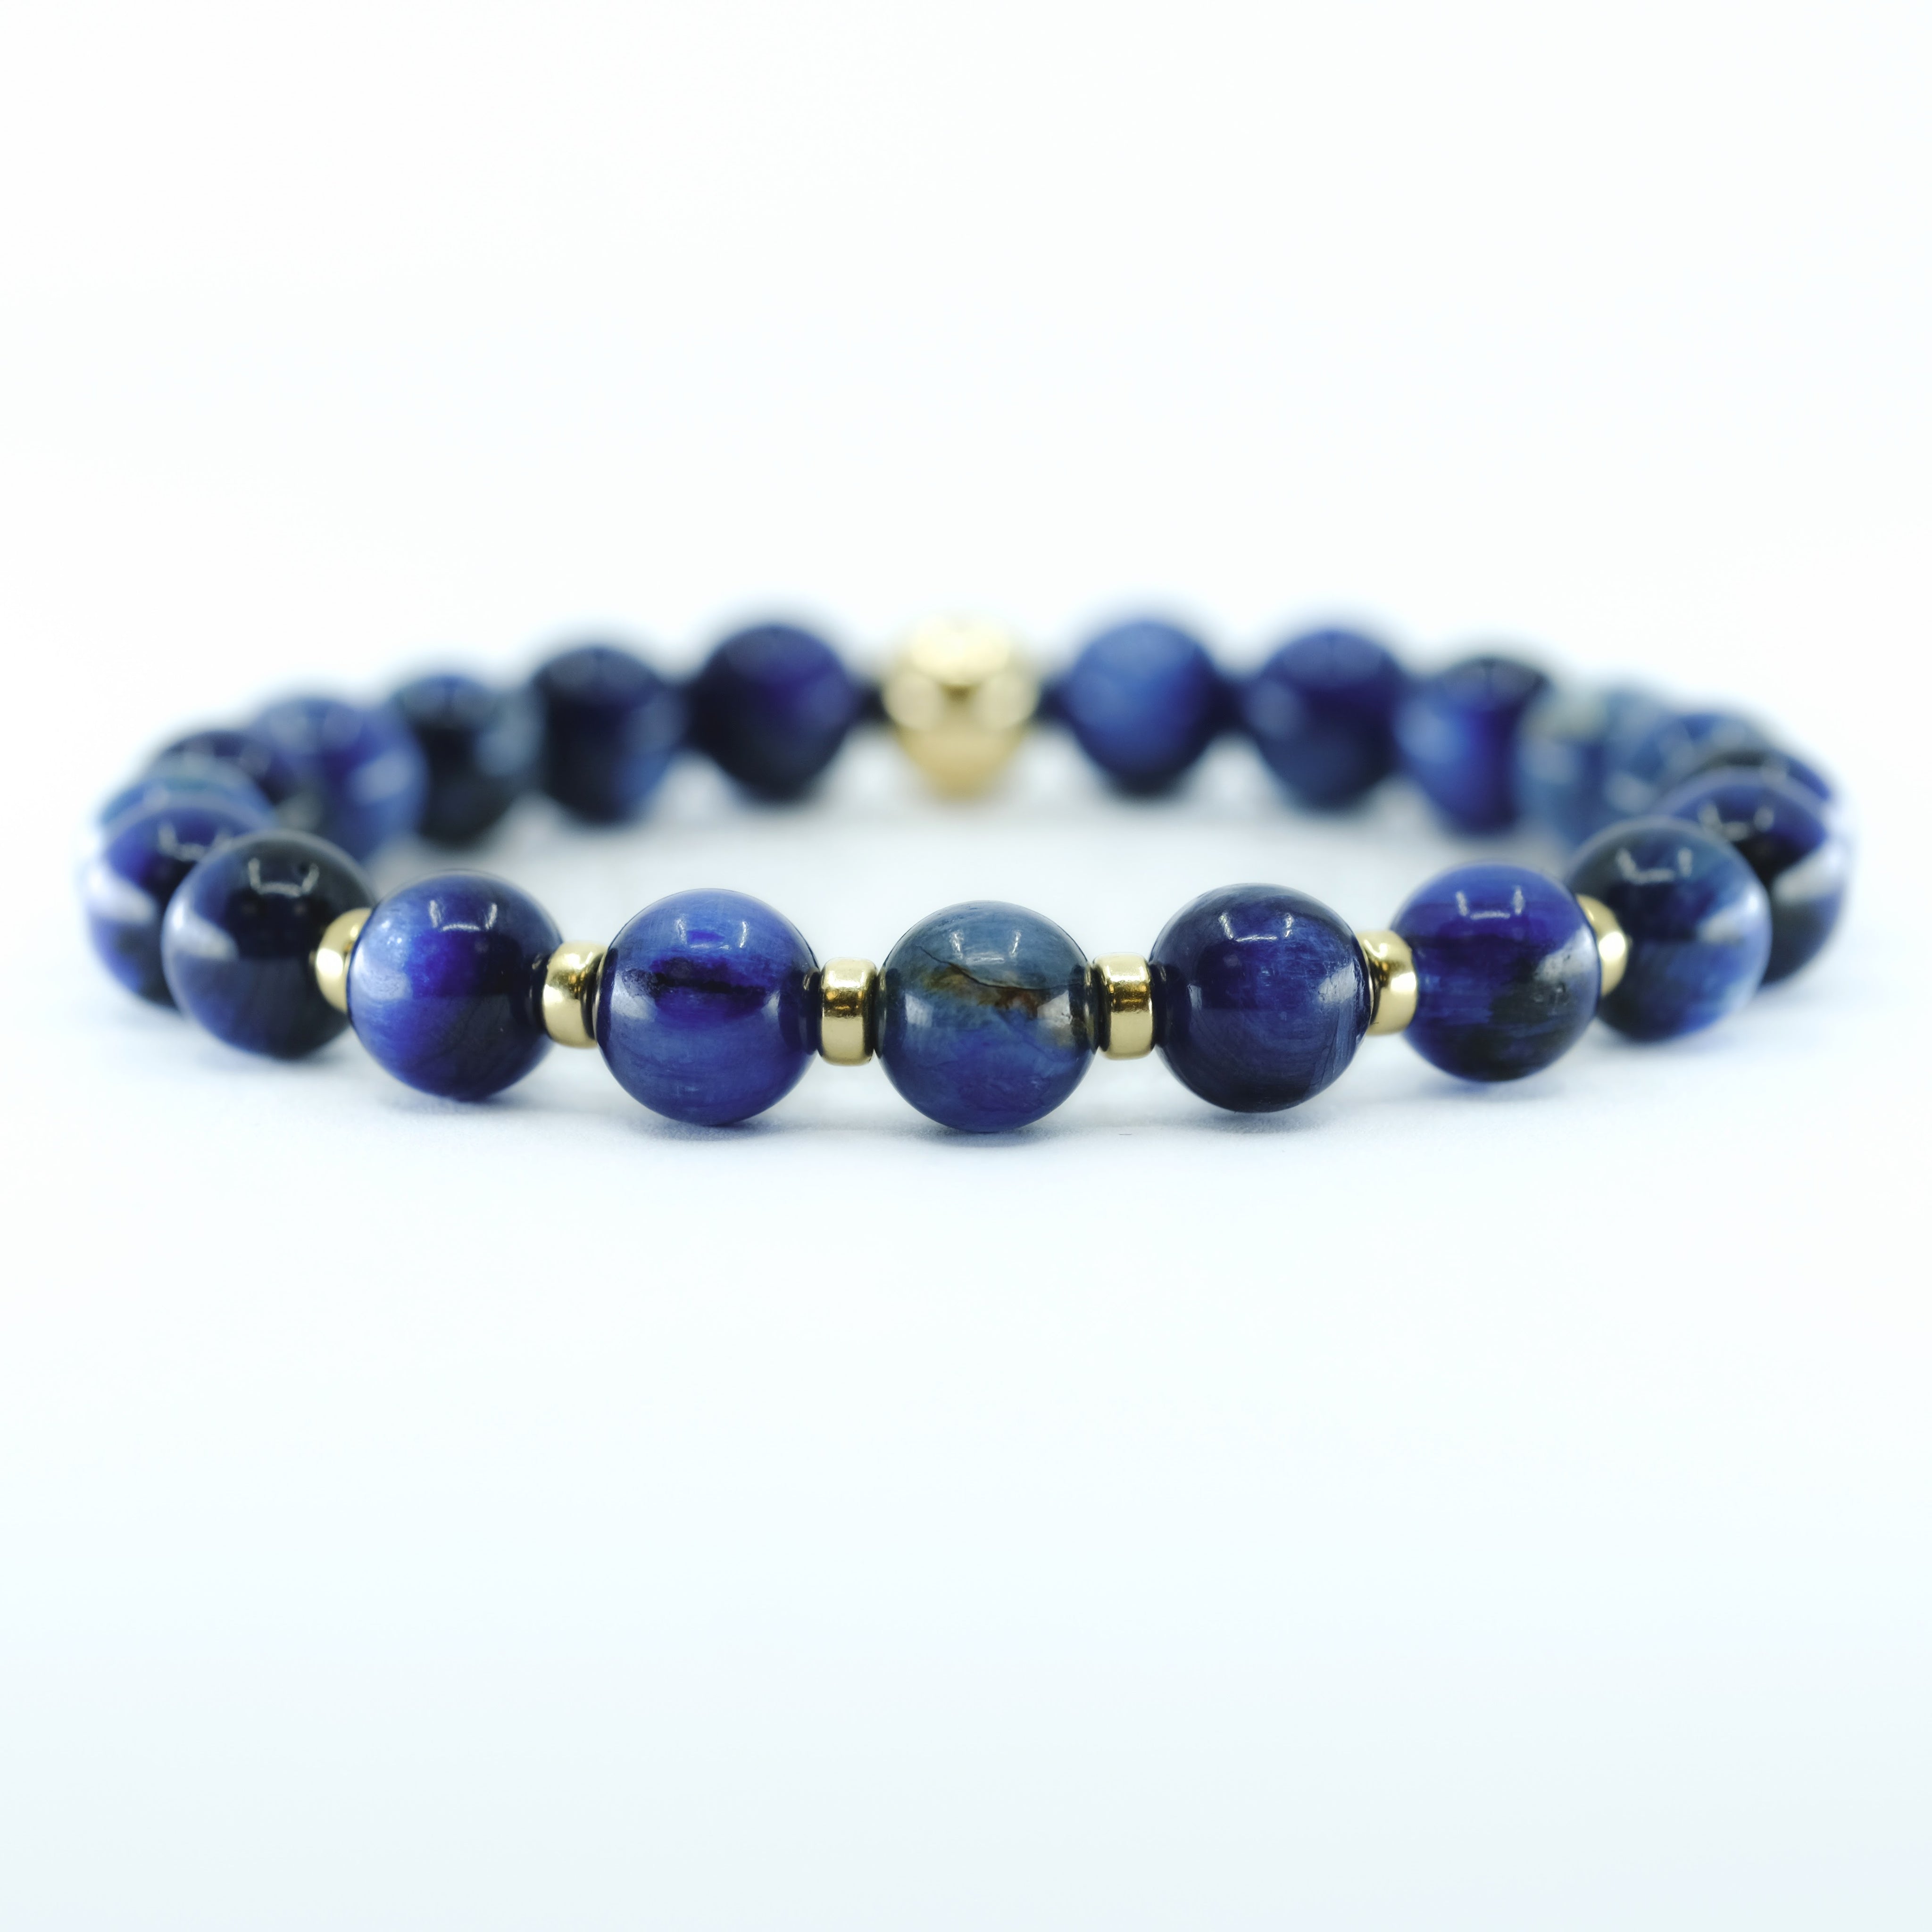 Kyanite gemstone bracelet with Gold accents 